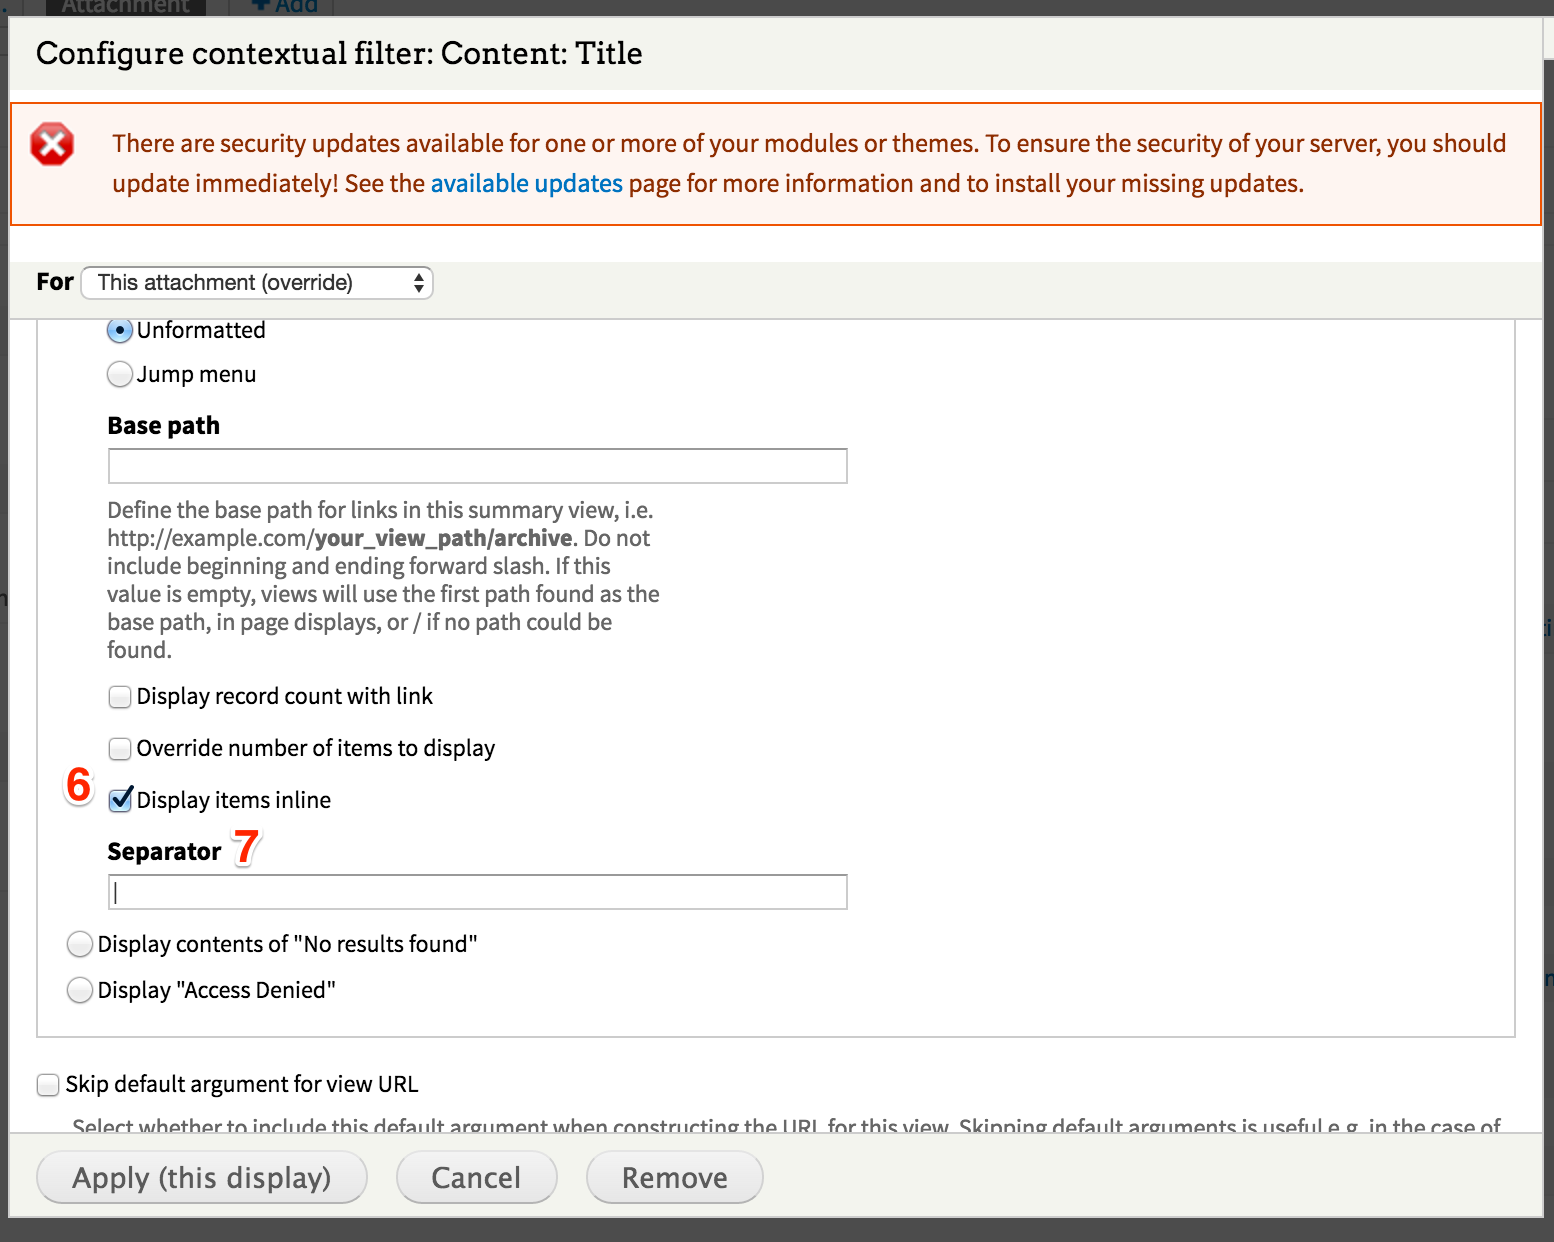 Screenshot for steps 6-7 of configuring the contextual filter.